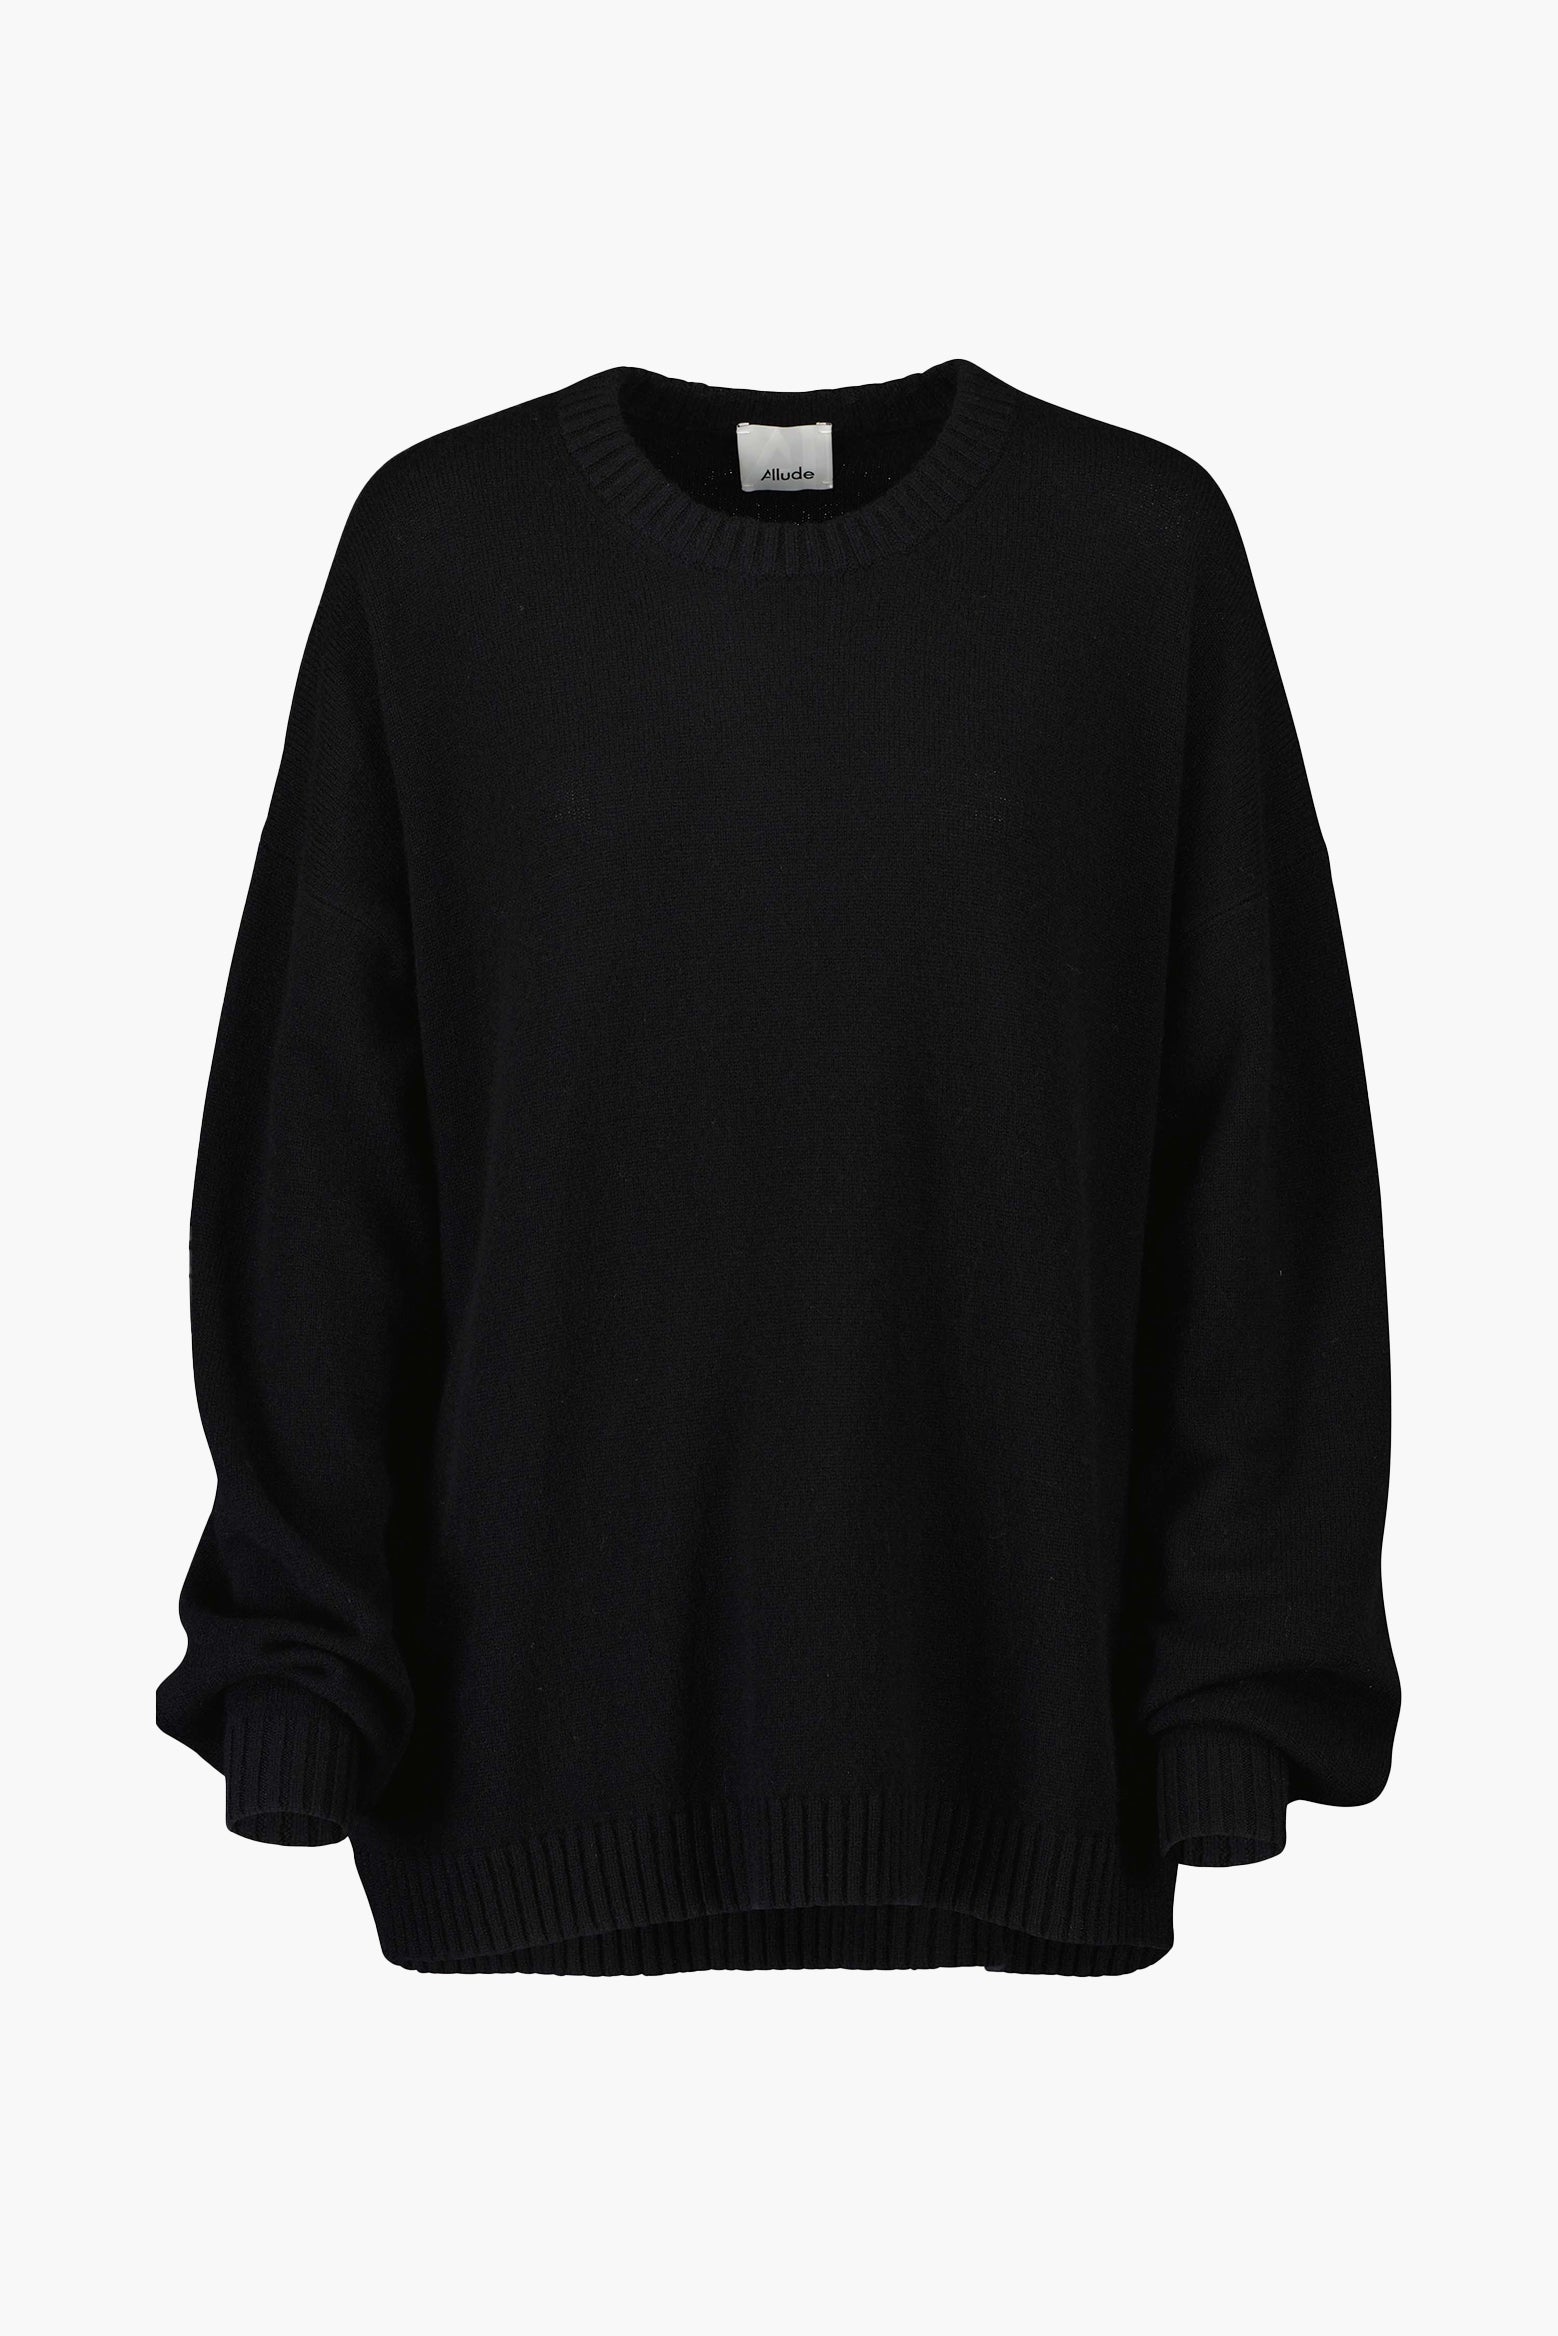 ALLUDE Oversize Crew in Black available at The New Trend Australia